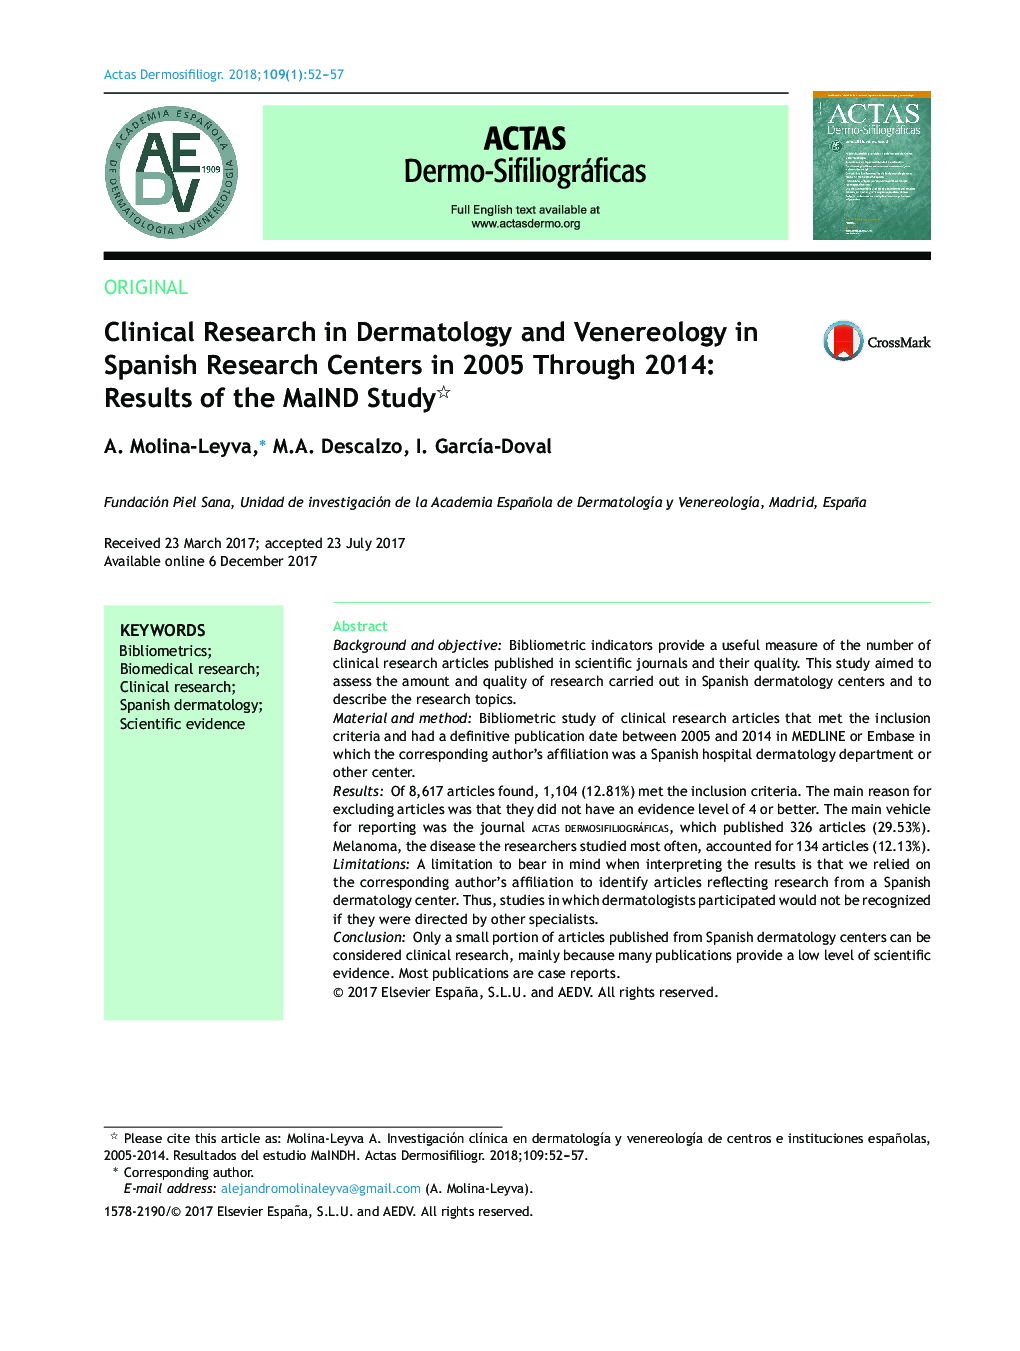 Clinical Research in Dermatology and Venereology in Spanish Research Centers in 2005 Through 2014: Results of the MaIND Study